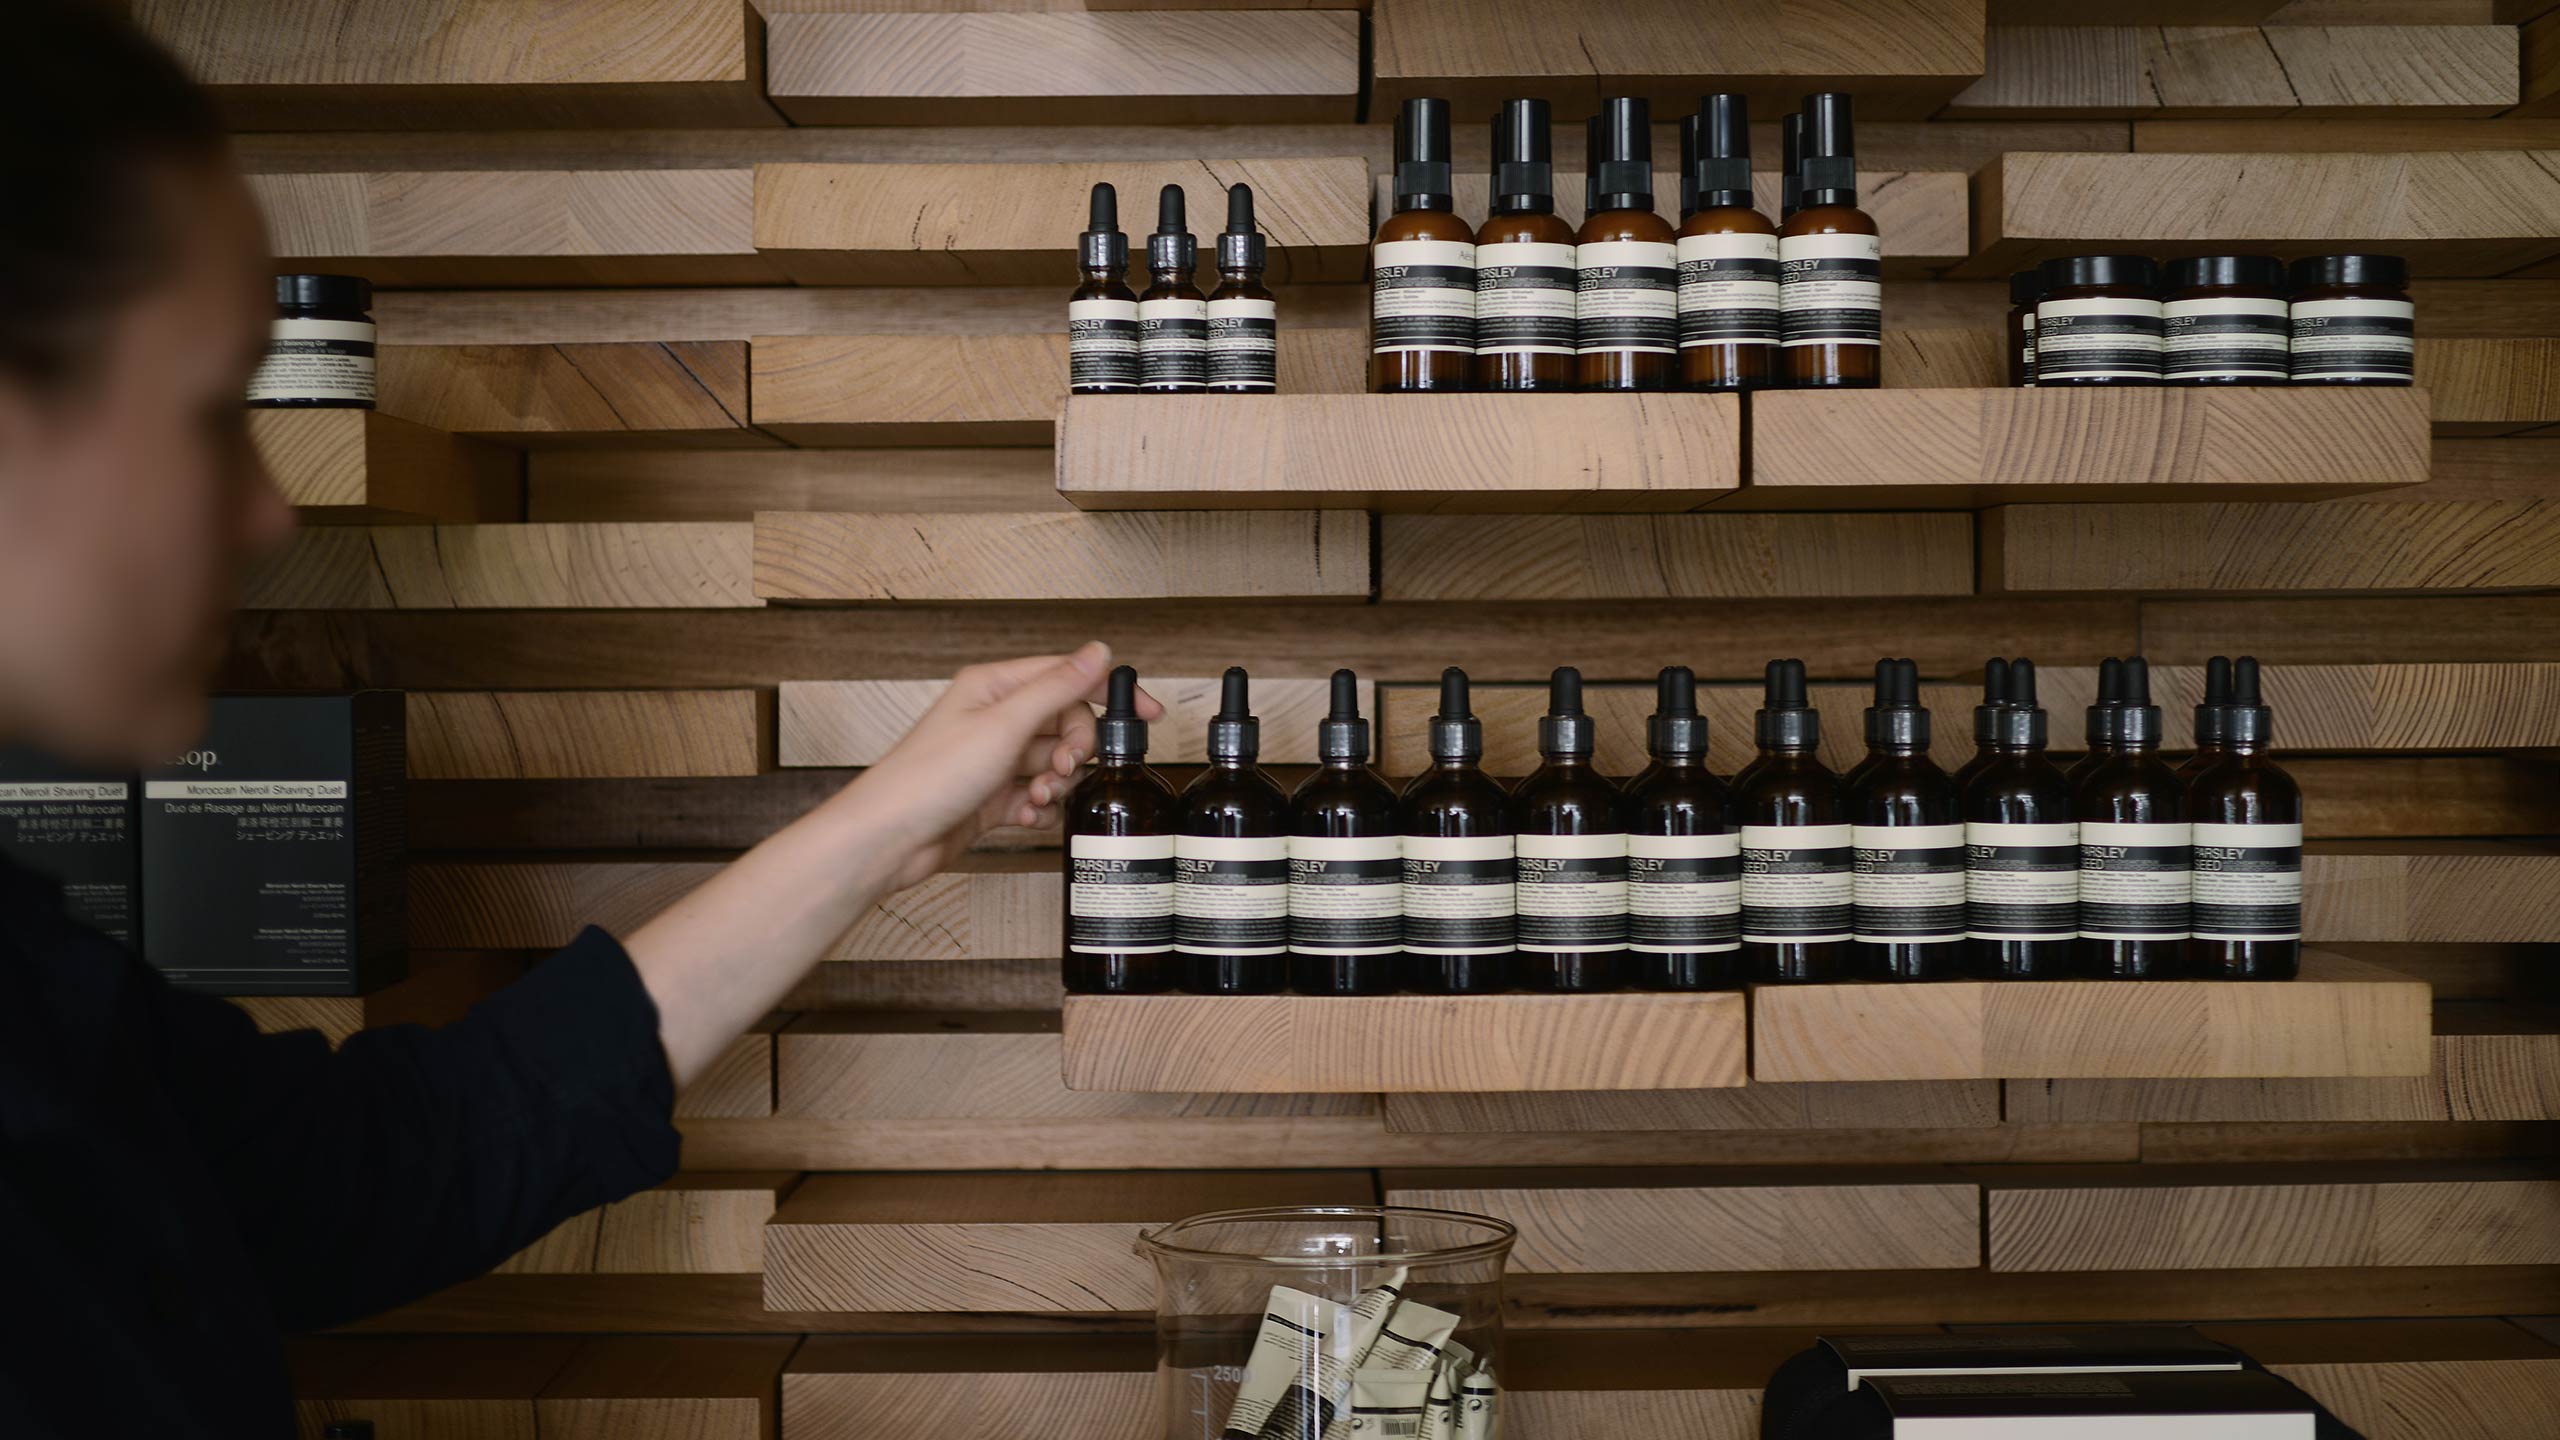 Image of an Aesop employee reaching for a shelf of Aesop product